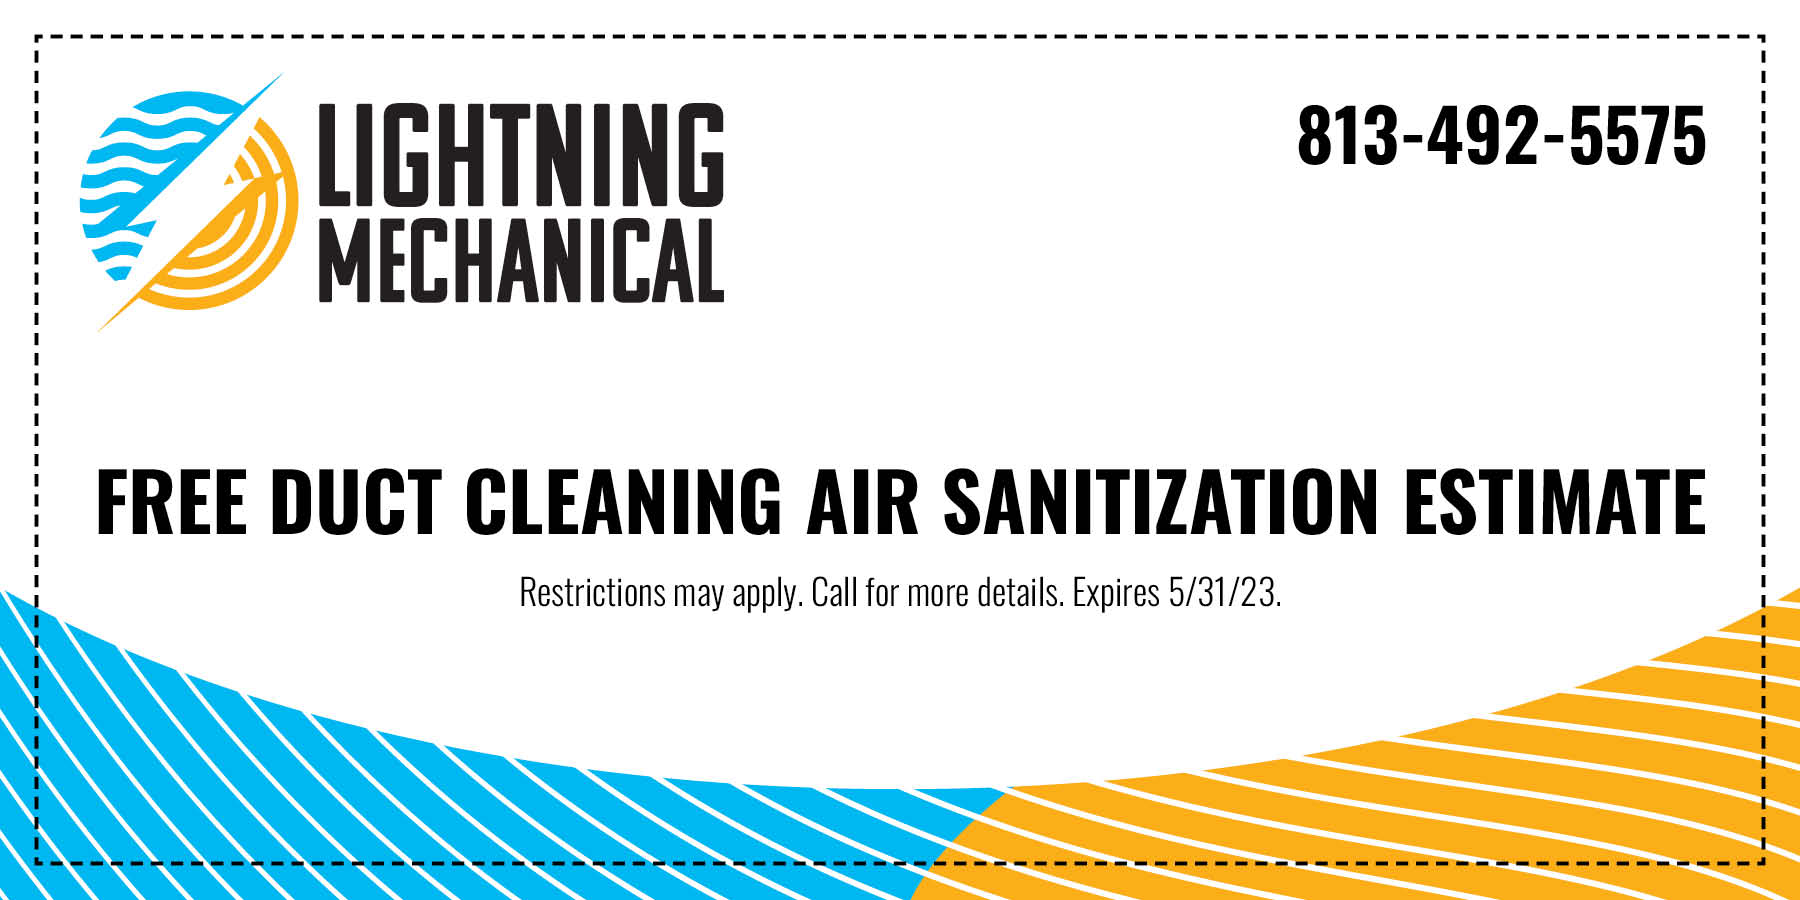 Free duct cleaning air sanitization estimate expires 5/31/2023.